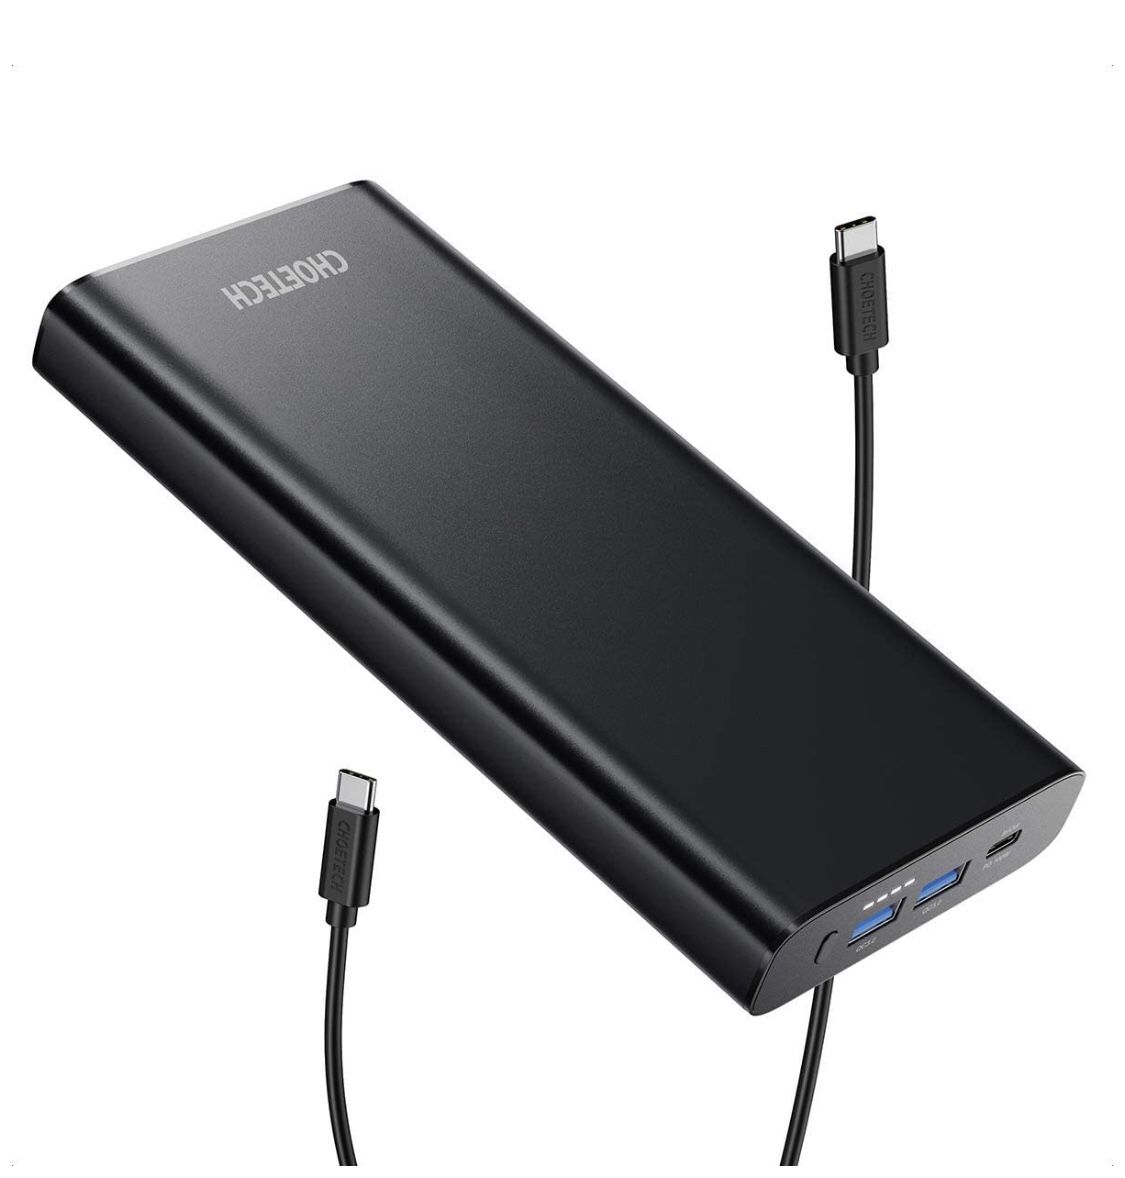 CHOETECH Portable Charger 26800mAh 100W PD 3.0 USB-C Power Bank with a USB-C Port (Input 60W Output 100W) 2 QC 3.0 USB-A Ports for Laptop, MacBook/iP